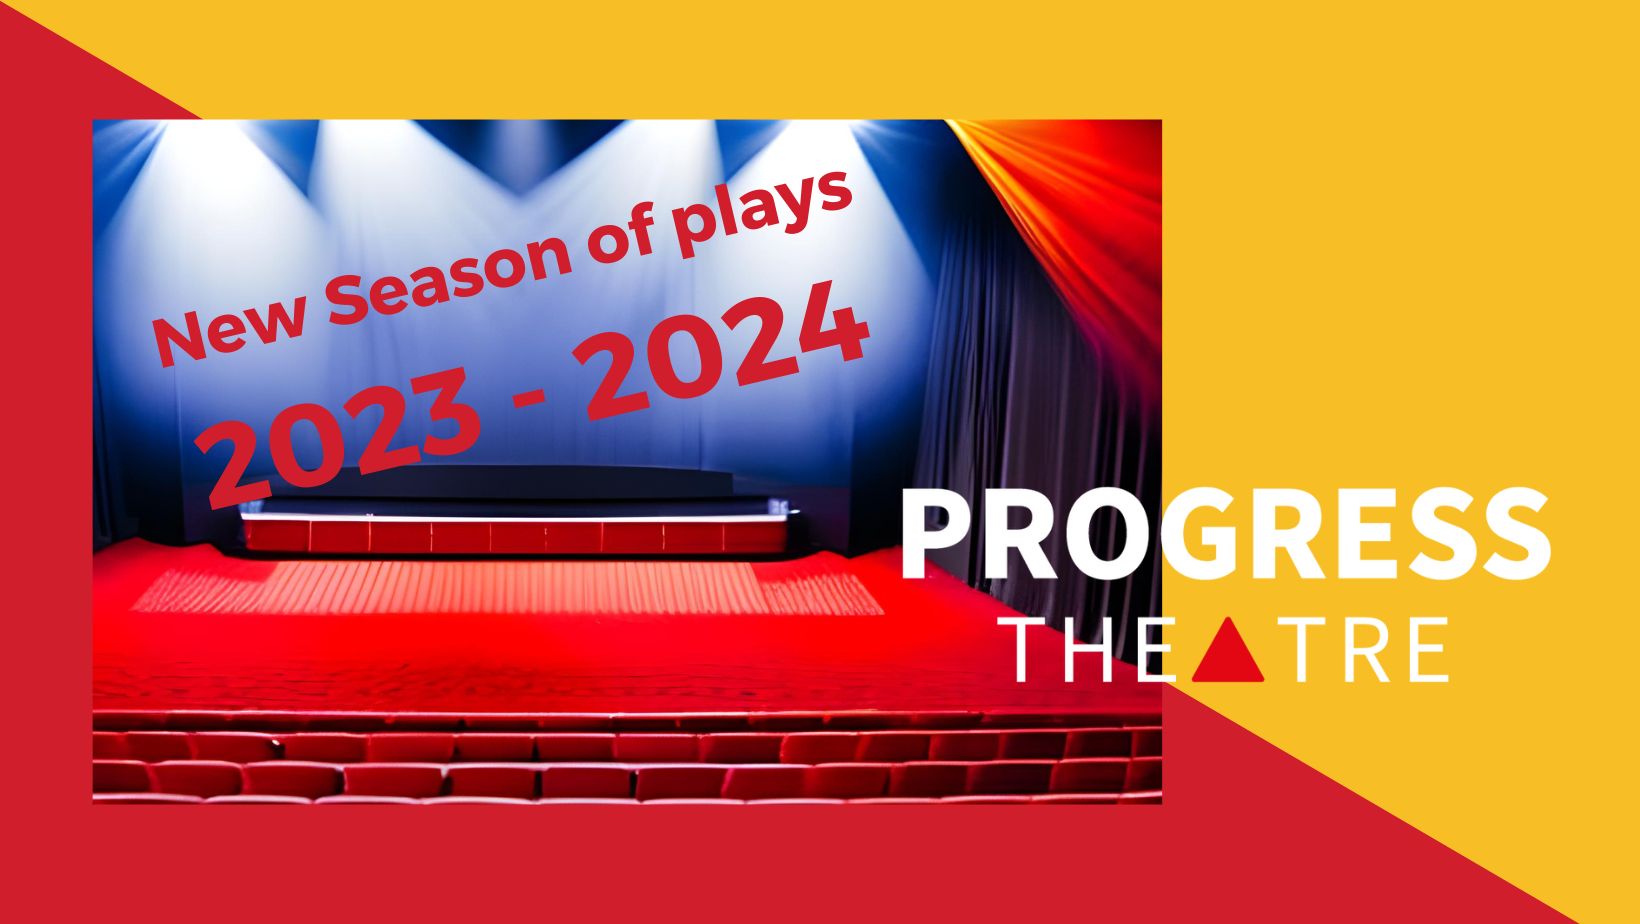 New season of plays for 2023-2024